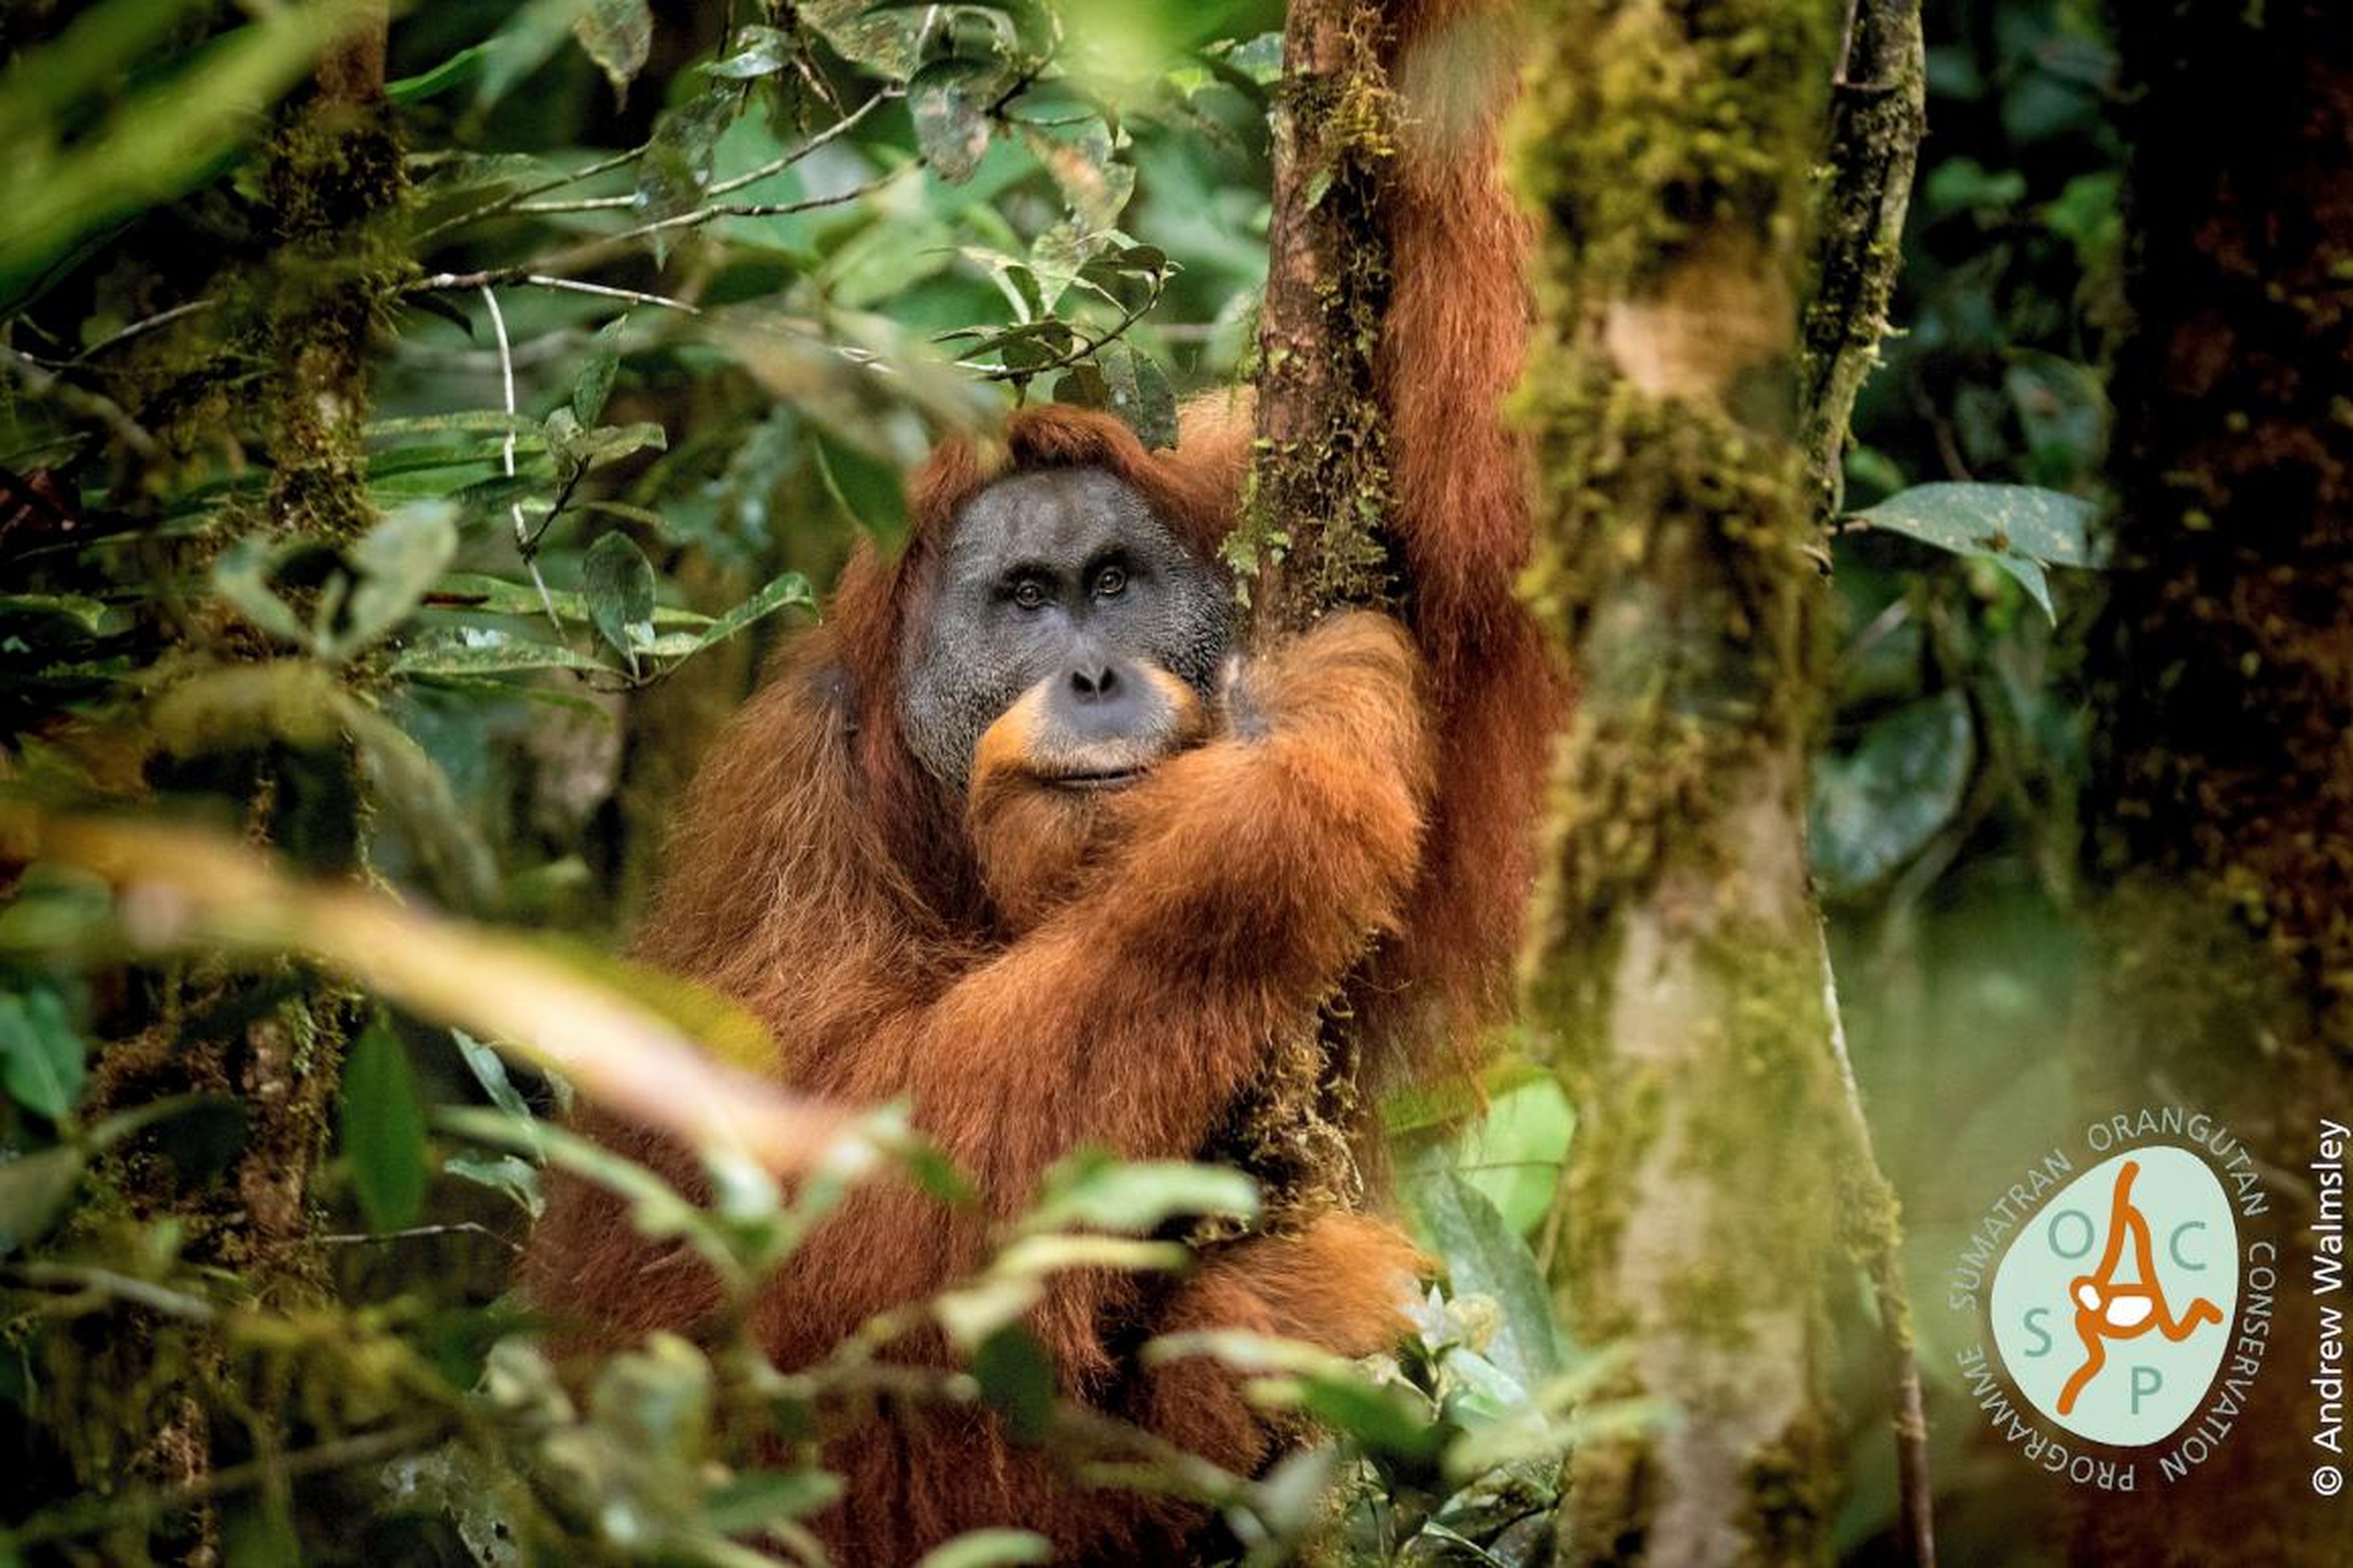 The <em>Pongo tapanuliensis</em> orangutan was recently discovered to be a distinct species of great ape.